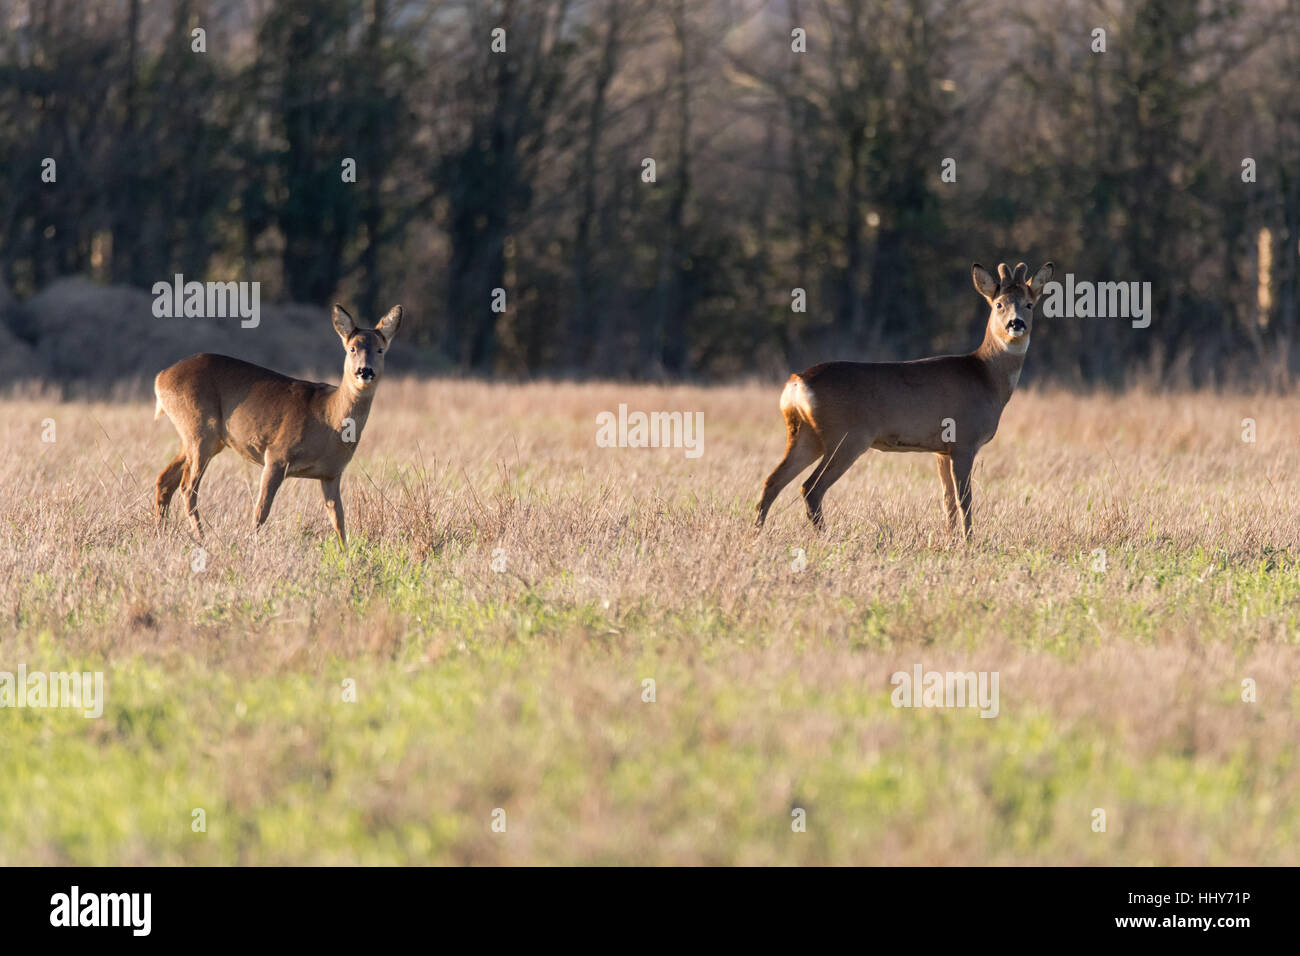 Roe deer (Capreolus capreolus) male and female, in family Cervidae, buck with growing antlers still covered in velvet fur Stock Photo